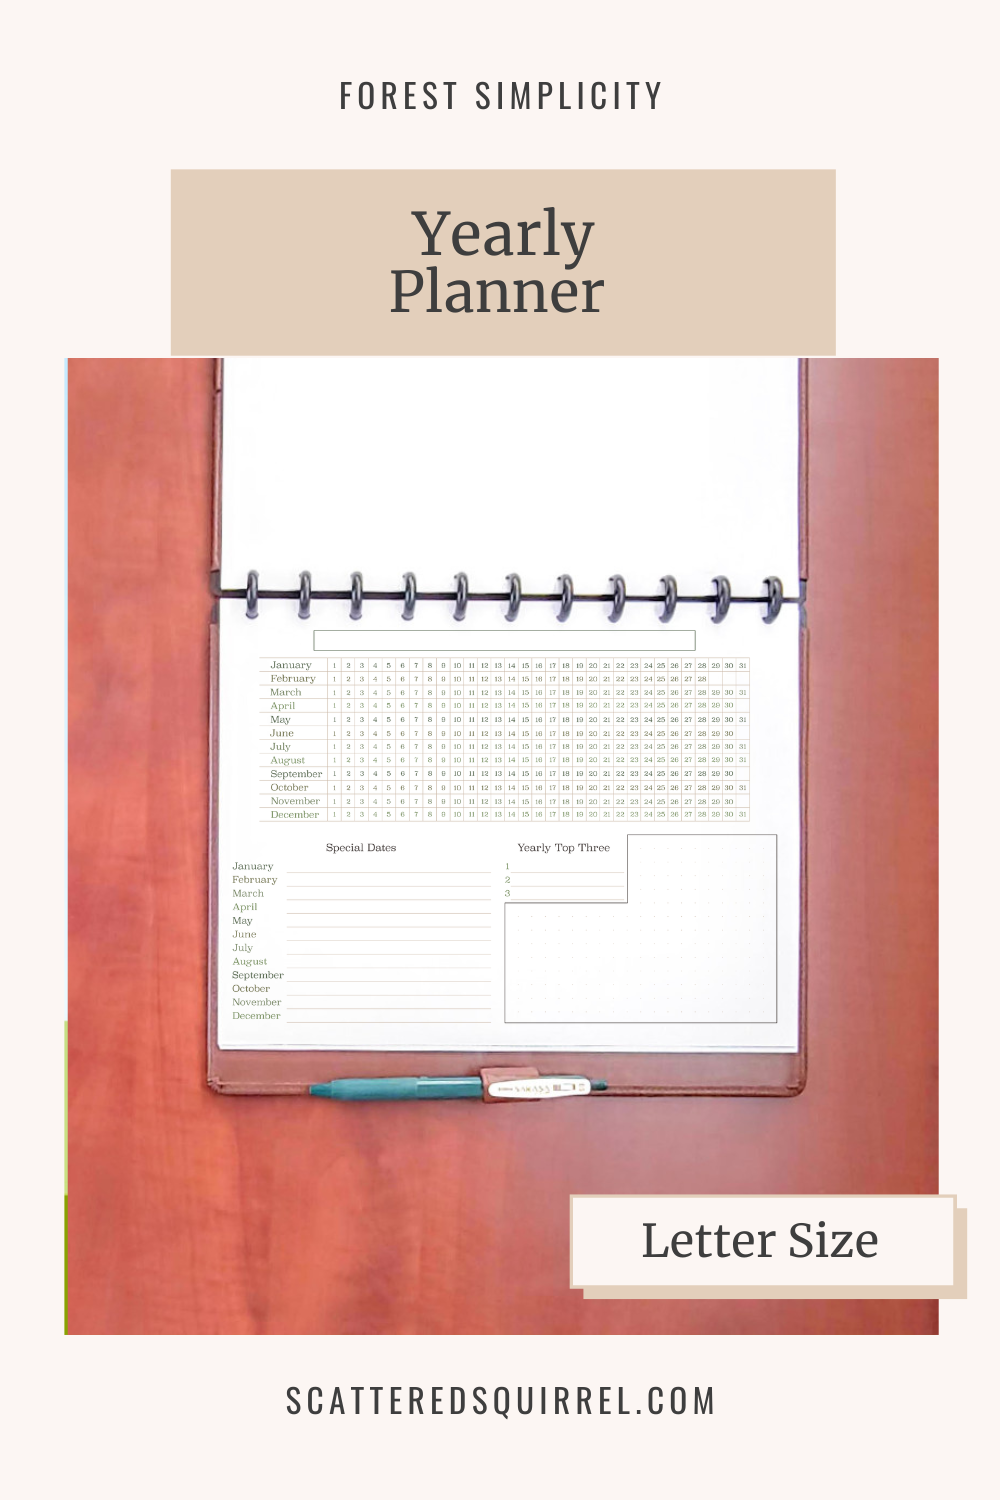 Image says "Forest Simplicity - Yearly Planner" at the top. Underneath is a picture of a brown leather planner lying open on a wooden desk. The page shows dated grid with each month being one row. Under that is room for recording special dates, setting priorities for the year and making notes . This image links to the Letter Size Yearly Planner PDF that can be downloaded.